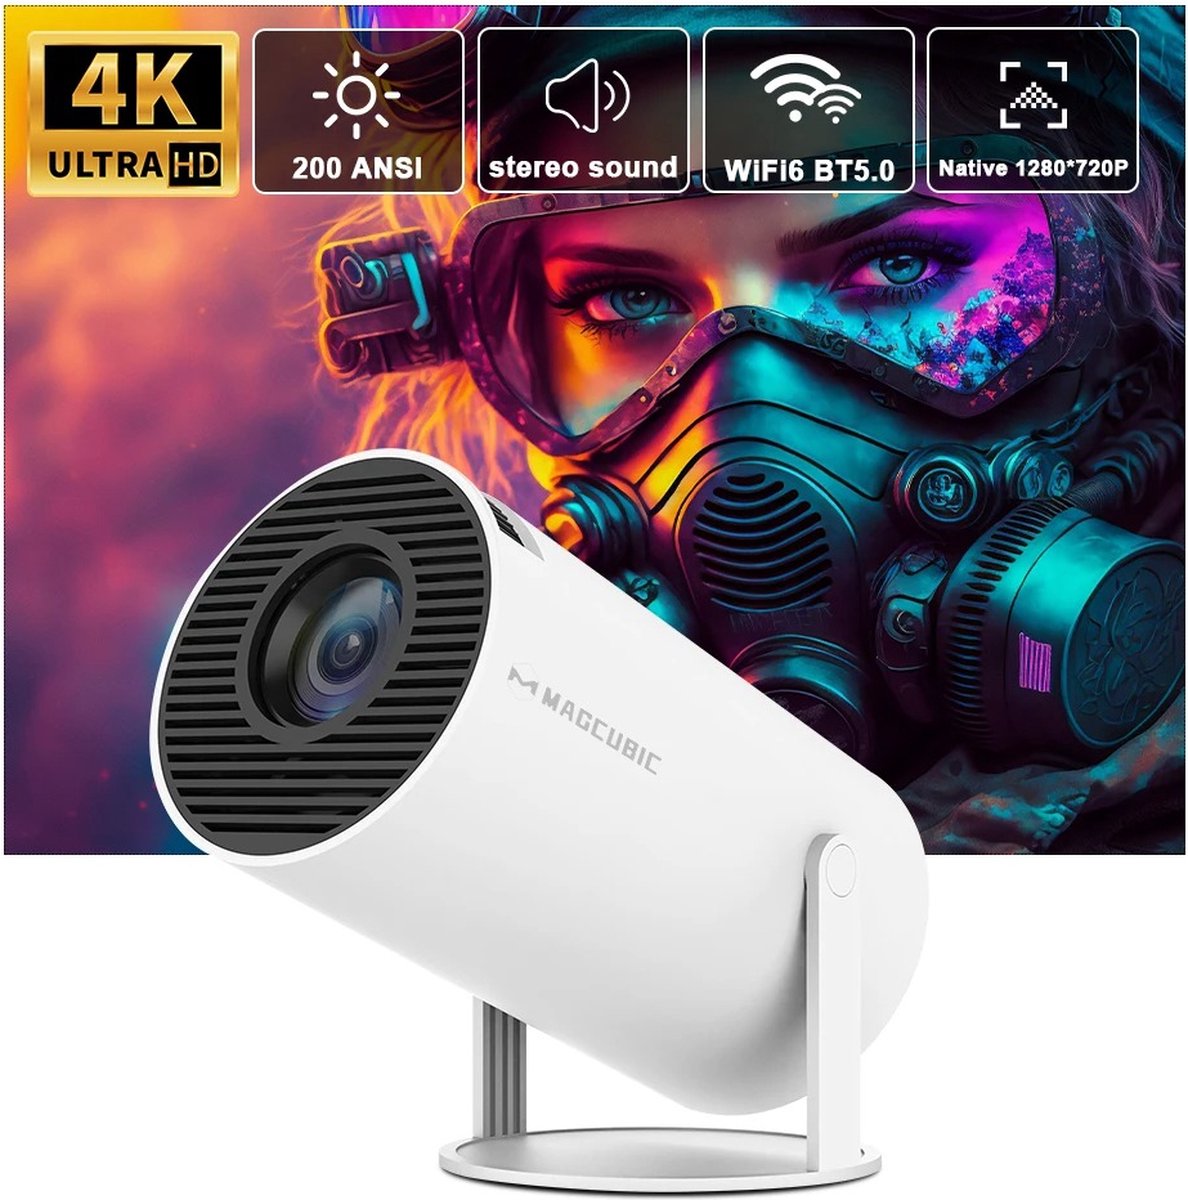 FineandFair - Beamer Projector - Beamer Scherm - Beamer projector bluetooth - Beamer projector thuisbioscoop - Beamer projector 4k - Beamer projector wifi full hd - Beamer projector hdmi out - Wit